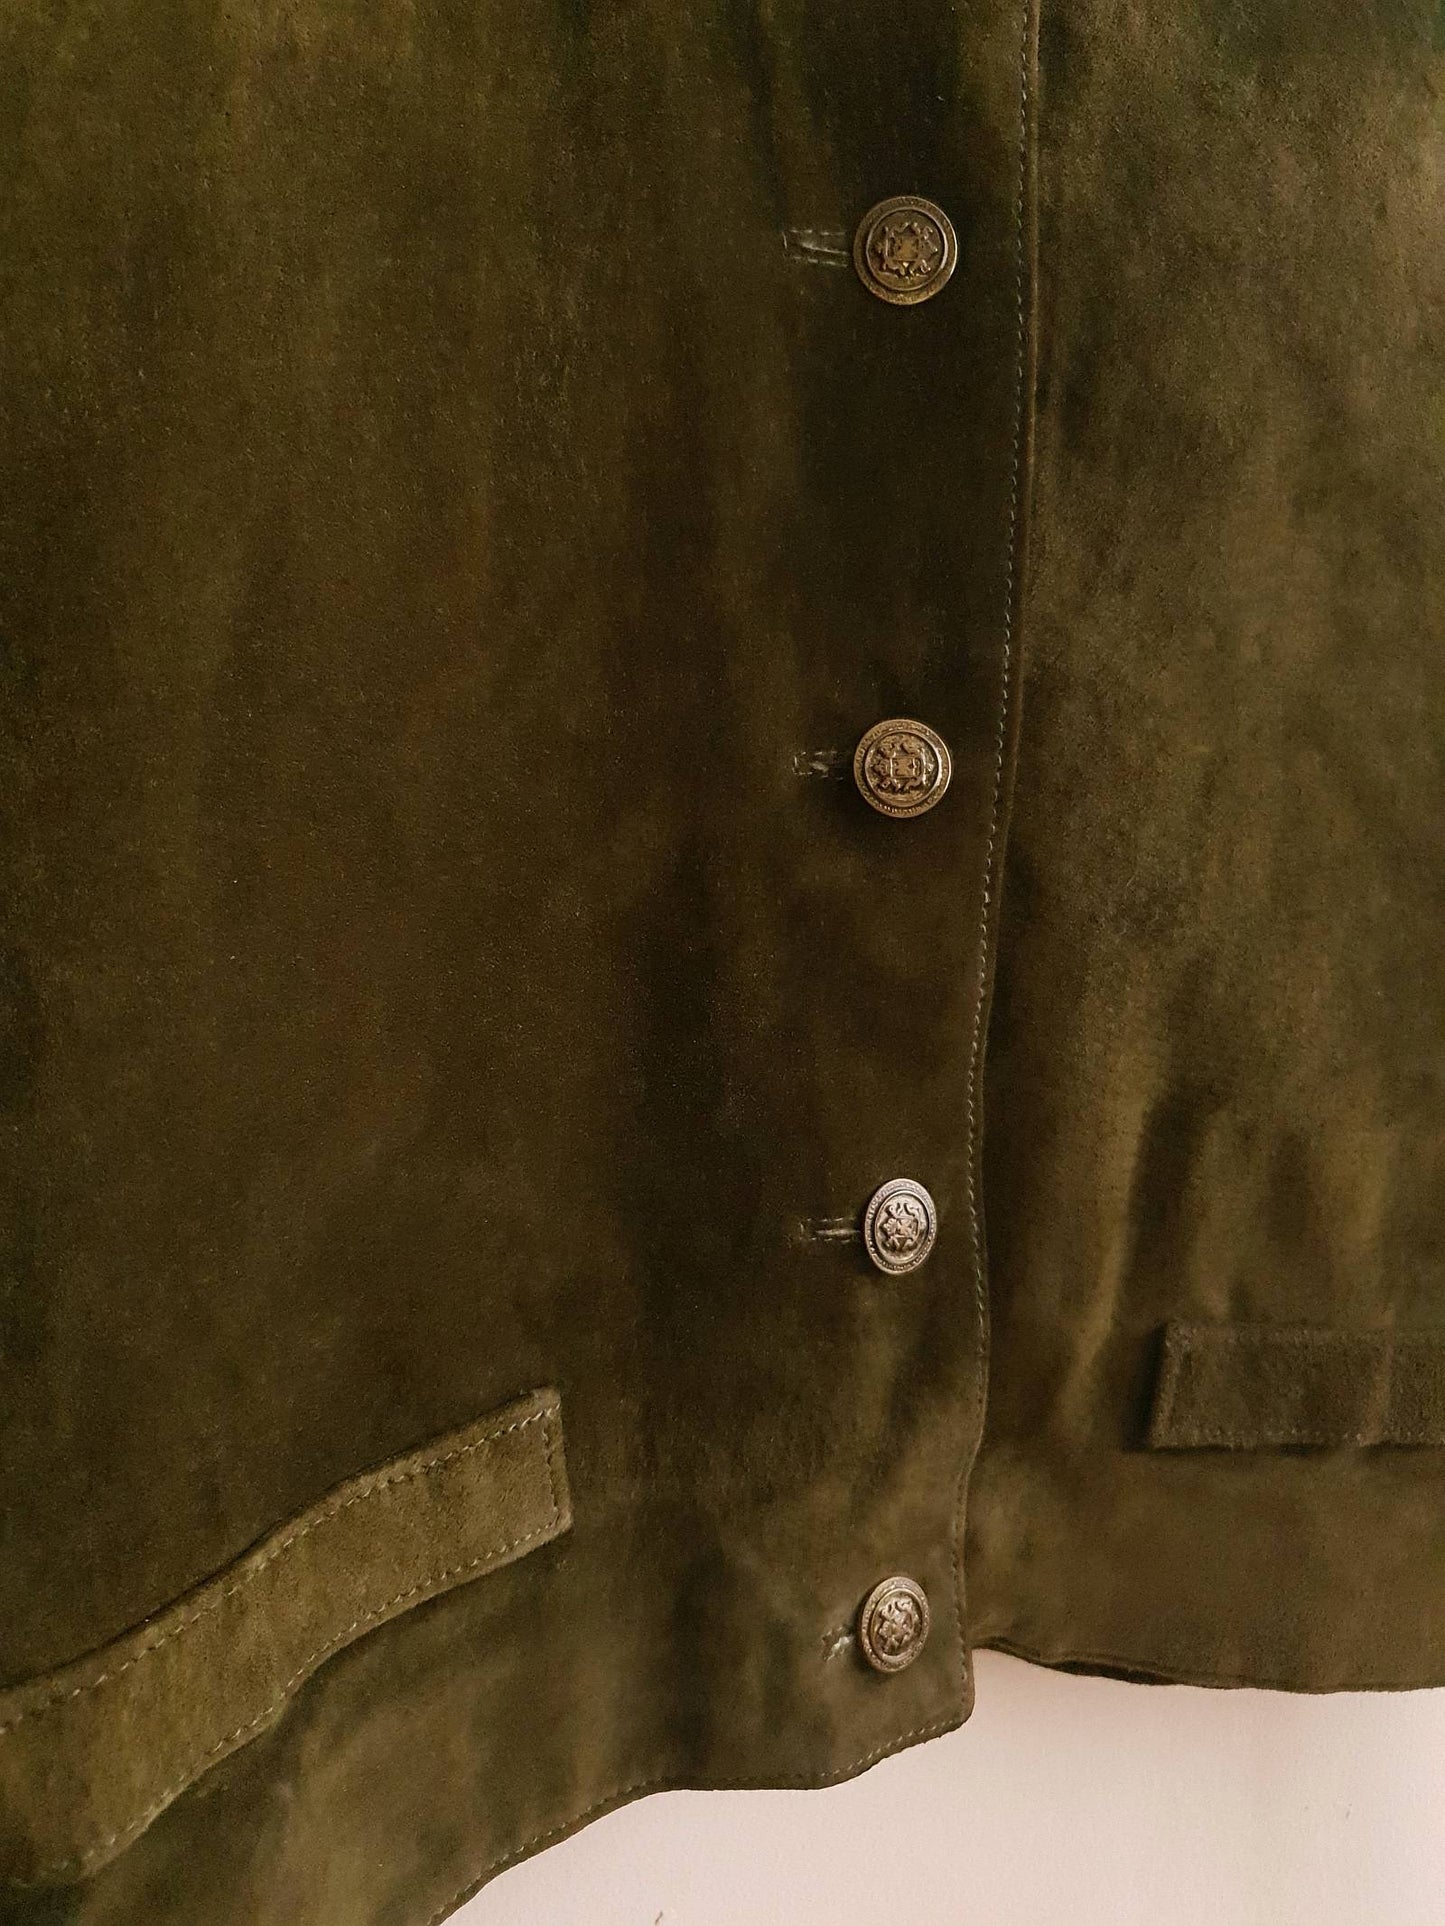 Chic 1980s Vintage Olive Green Suede Leather Jacket - Size 10